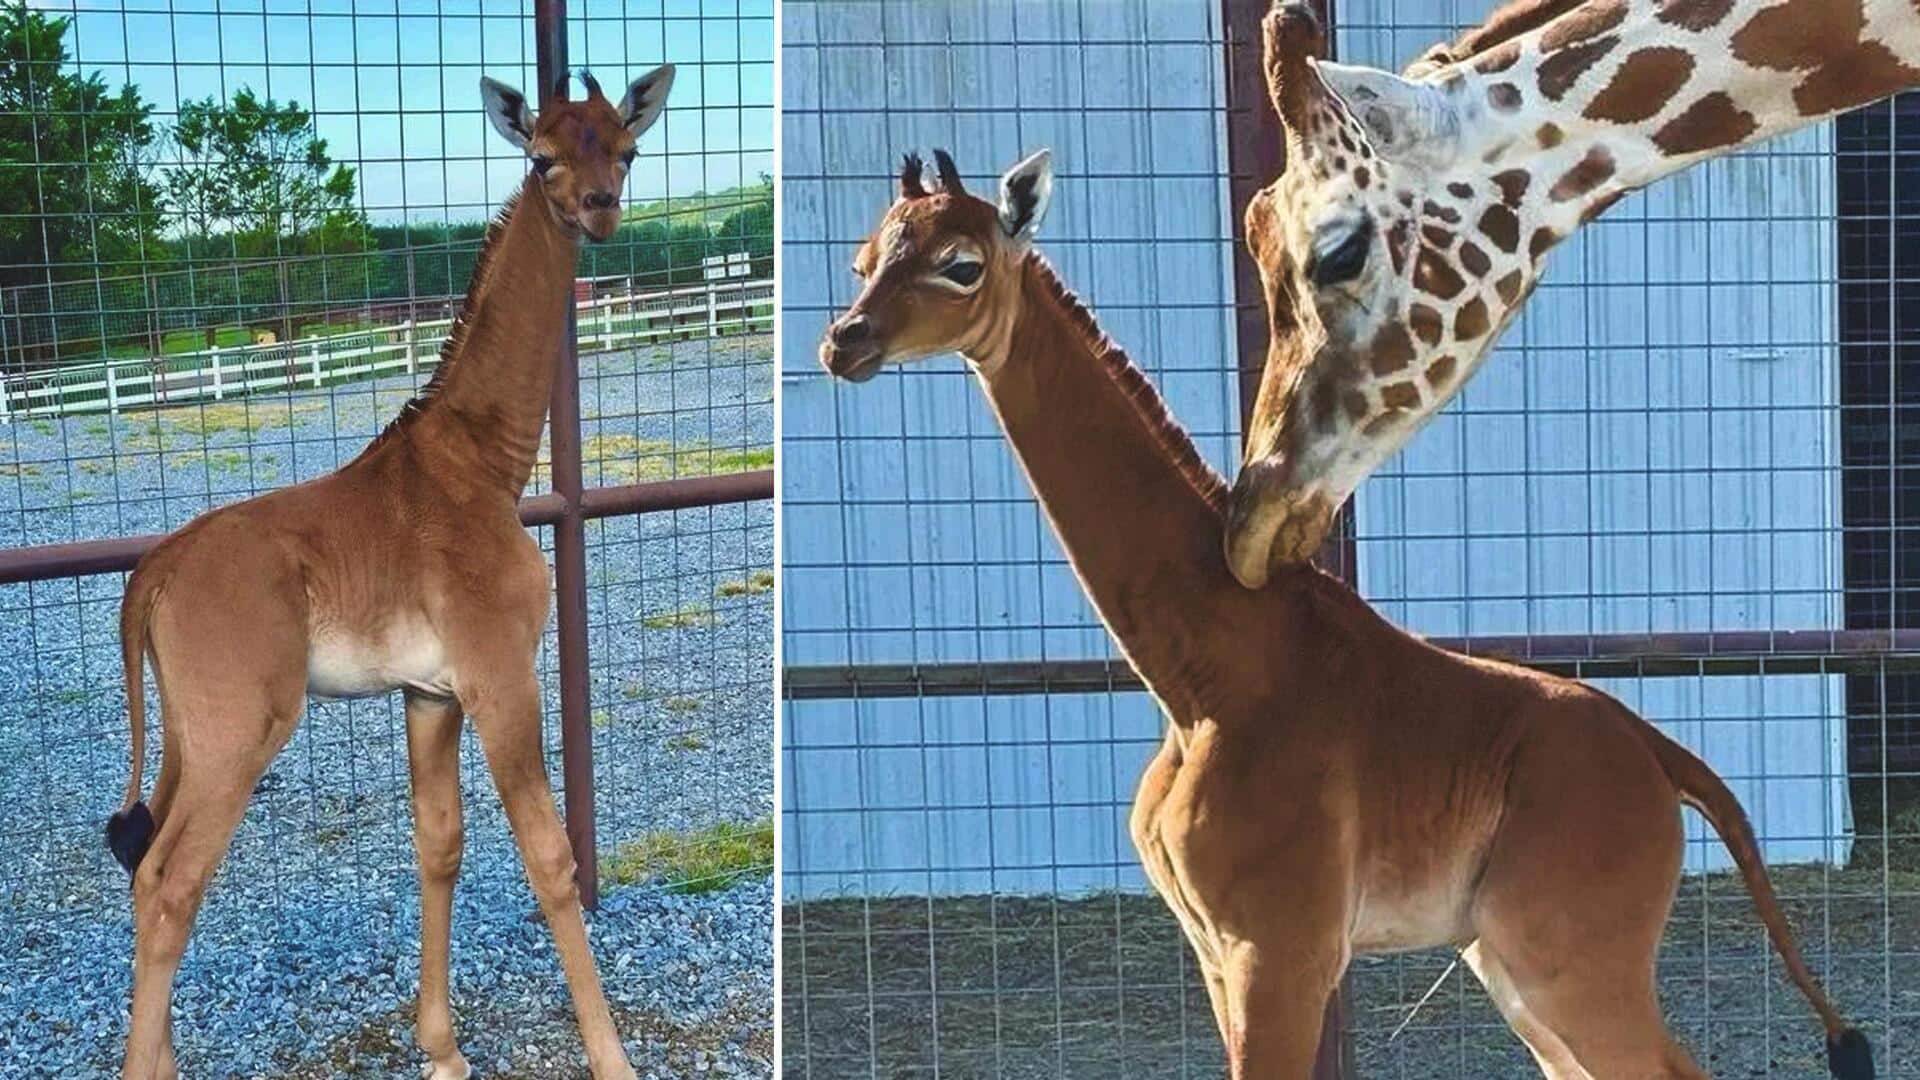 US: Tennessee zoo welcomes the world's only spotless giraffe